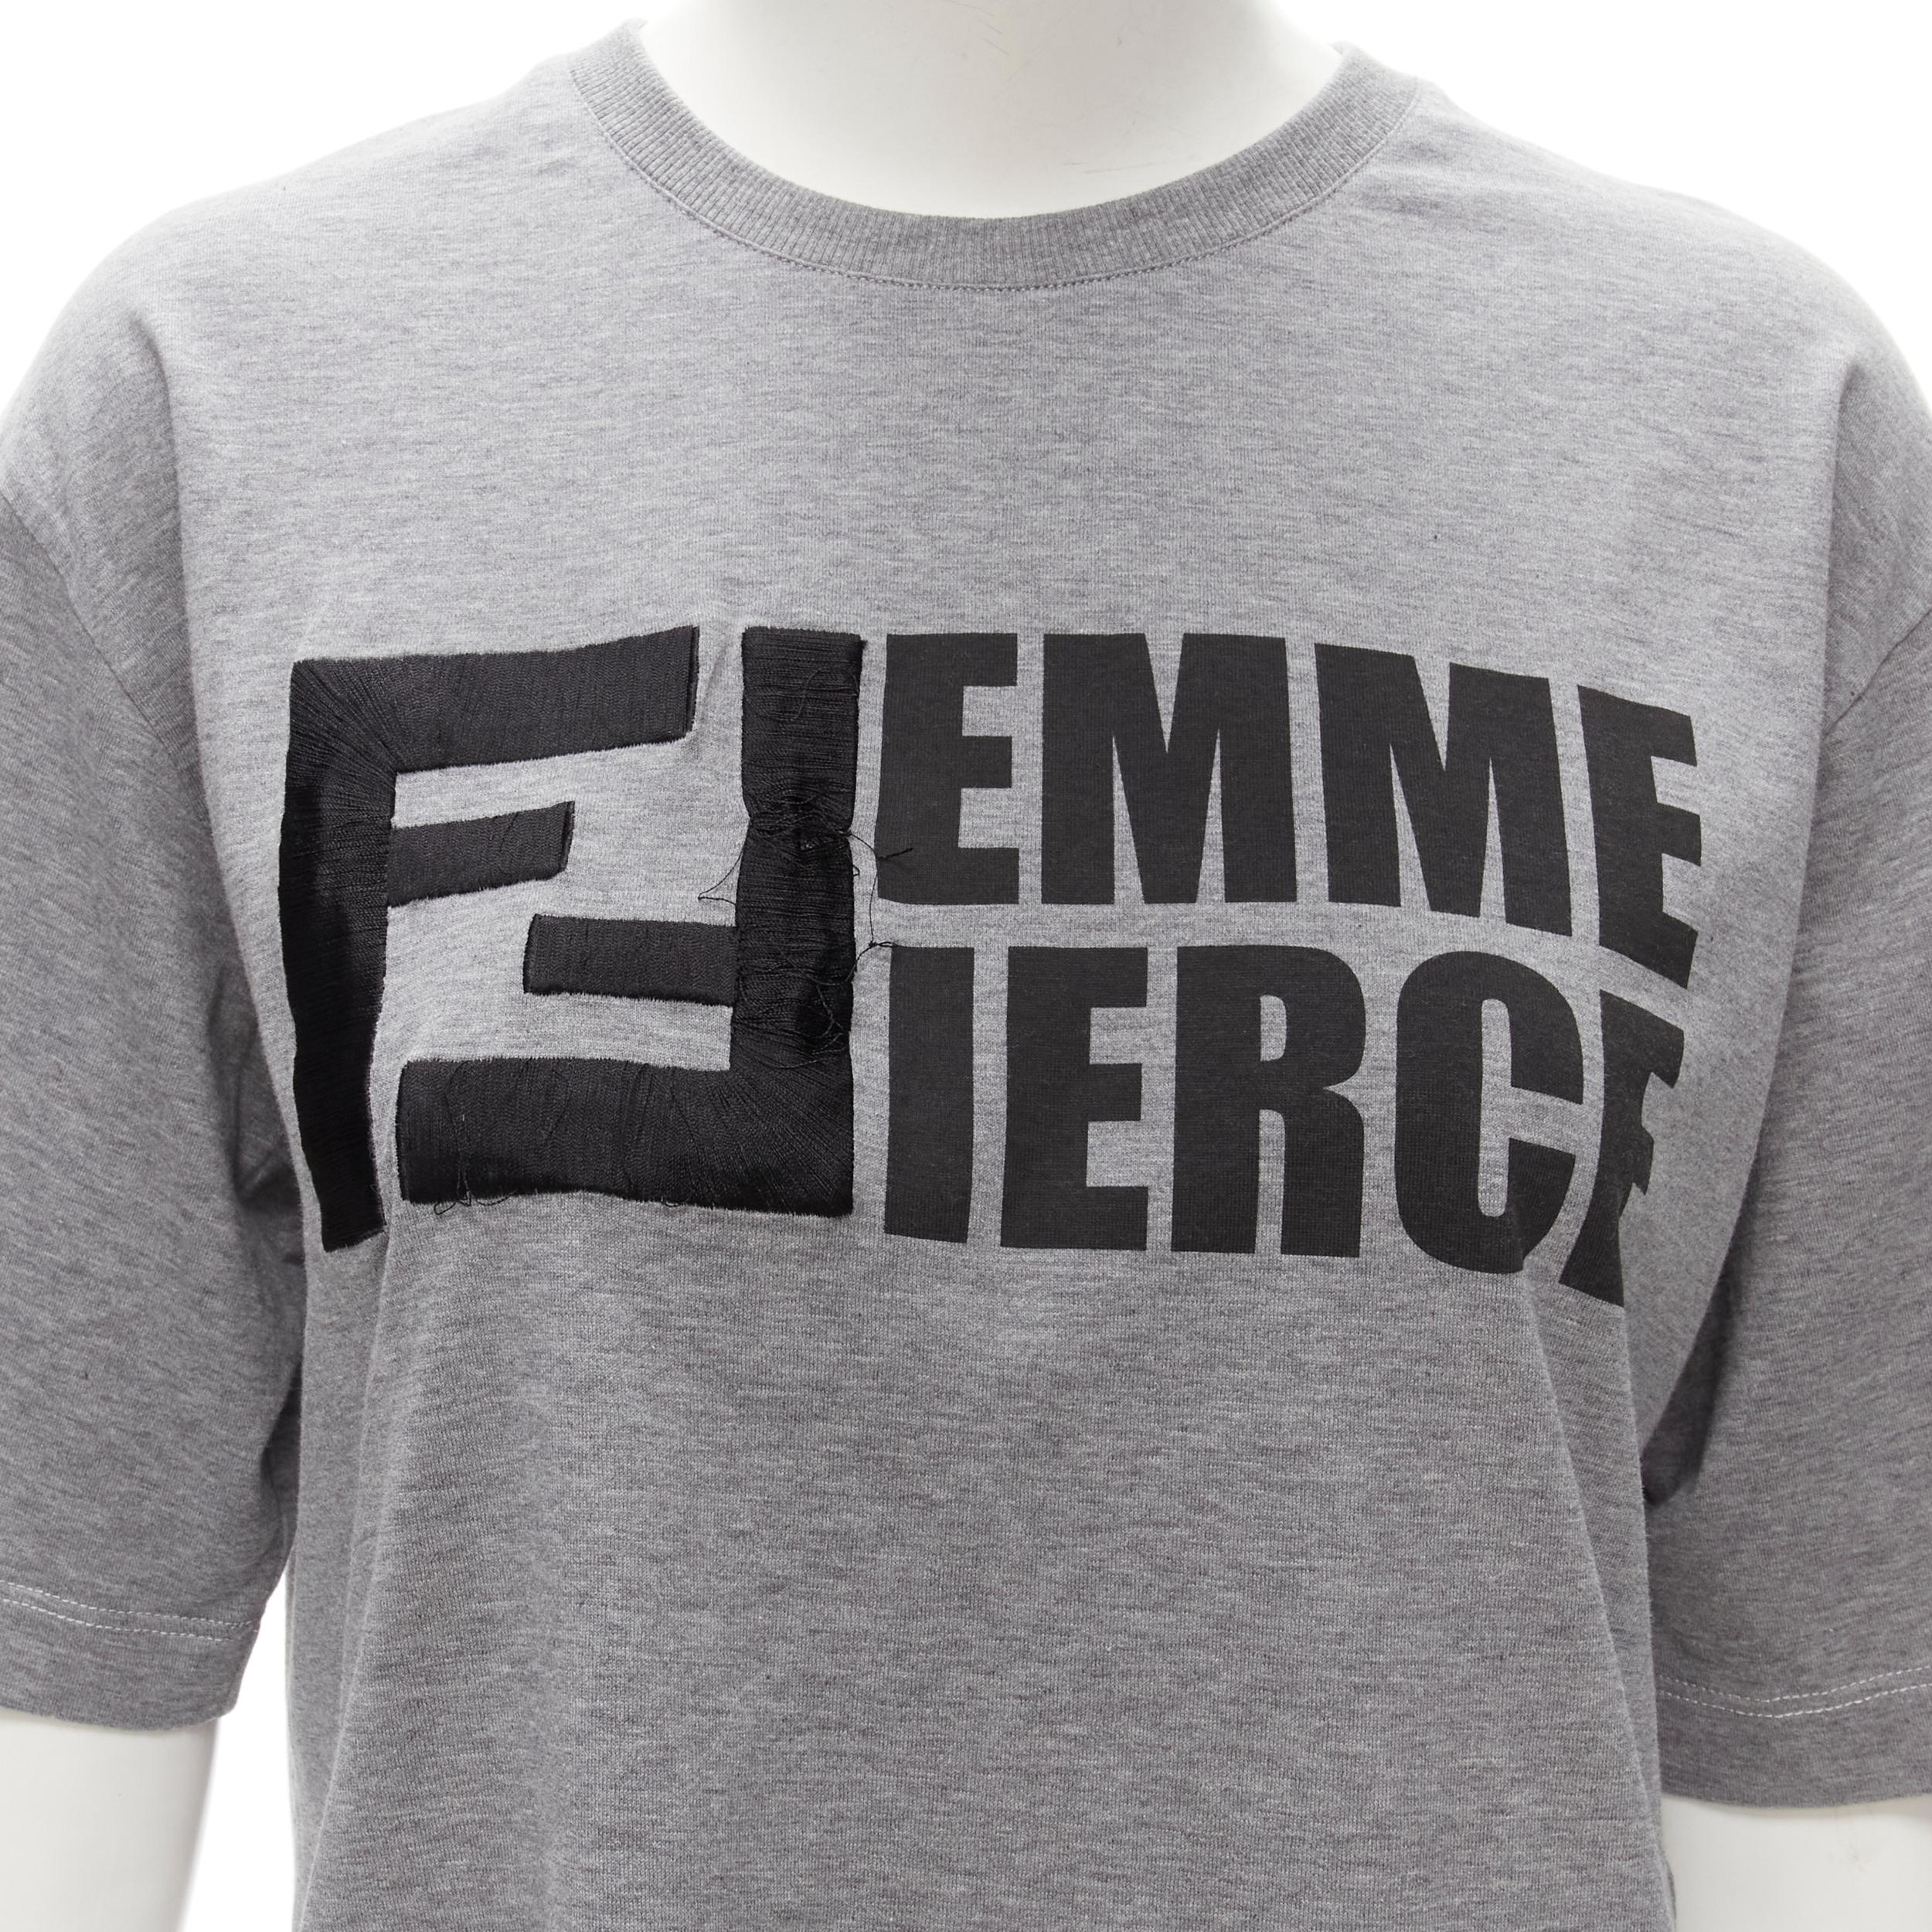 FENDI Femme Fierce embroidery FF logo grey cropped cotton tshirt M
Brand: Fendi
Collection: Femme Fierce 
Material: Cotton
Color: Grey
Pattern: Logomania
Extra Detail: Cropped top.
Made in: Italy

CONDITION:
Condition: Good, this item was pre-owned